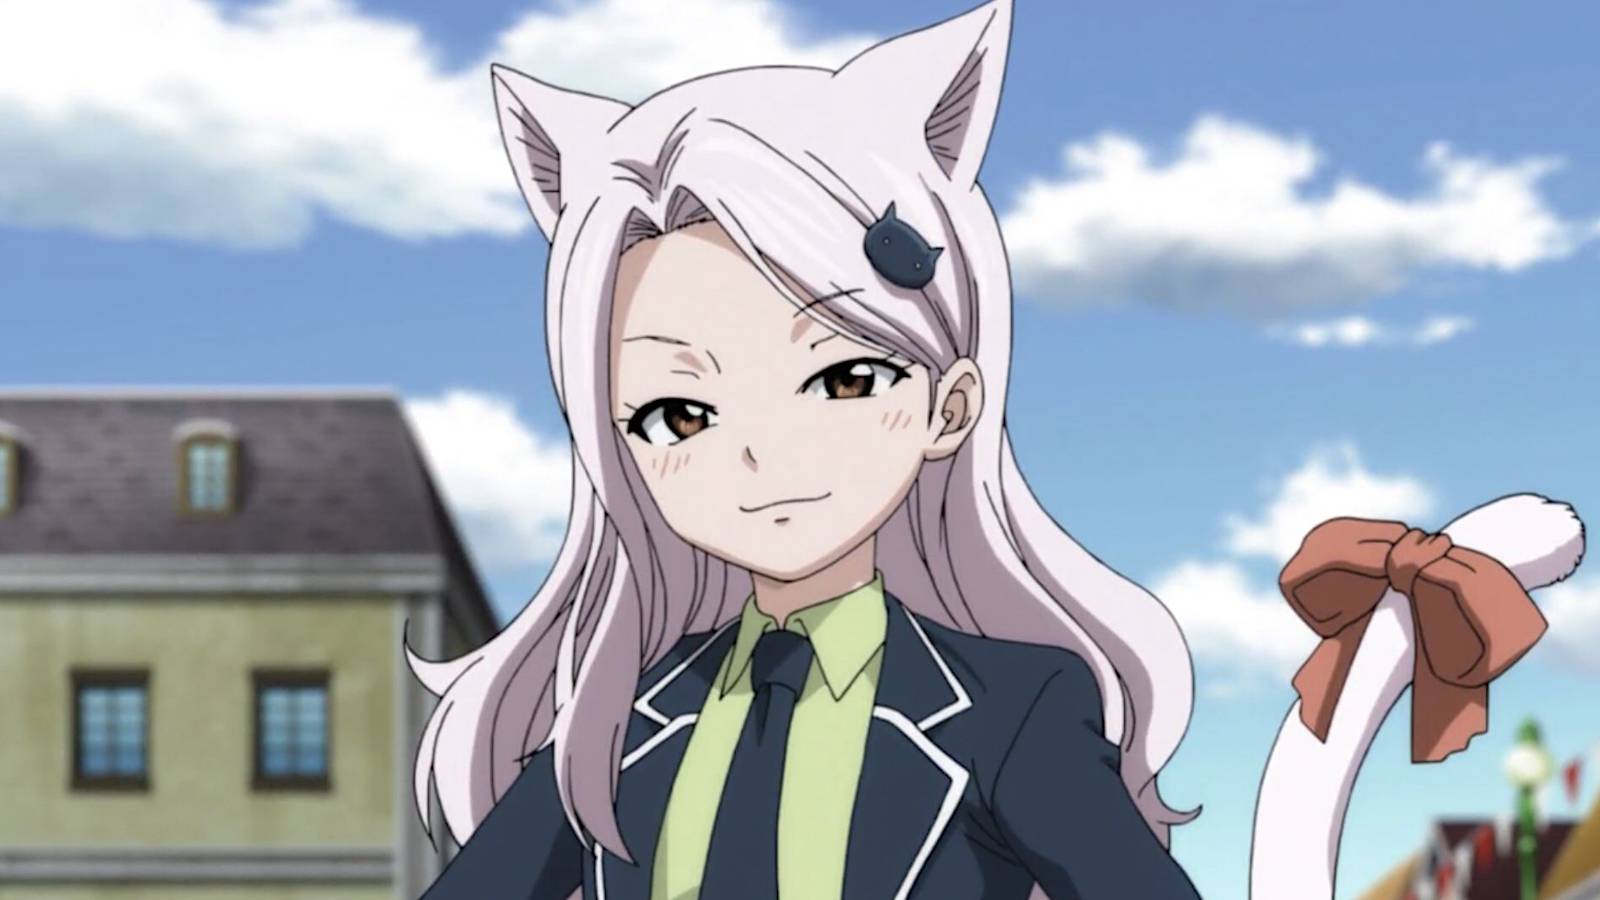 The 15 Best Anime Cat Girl Characters (And Why We Love Them)